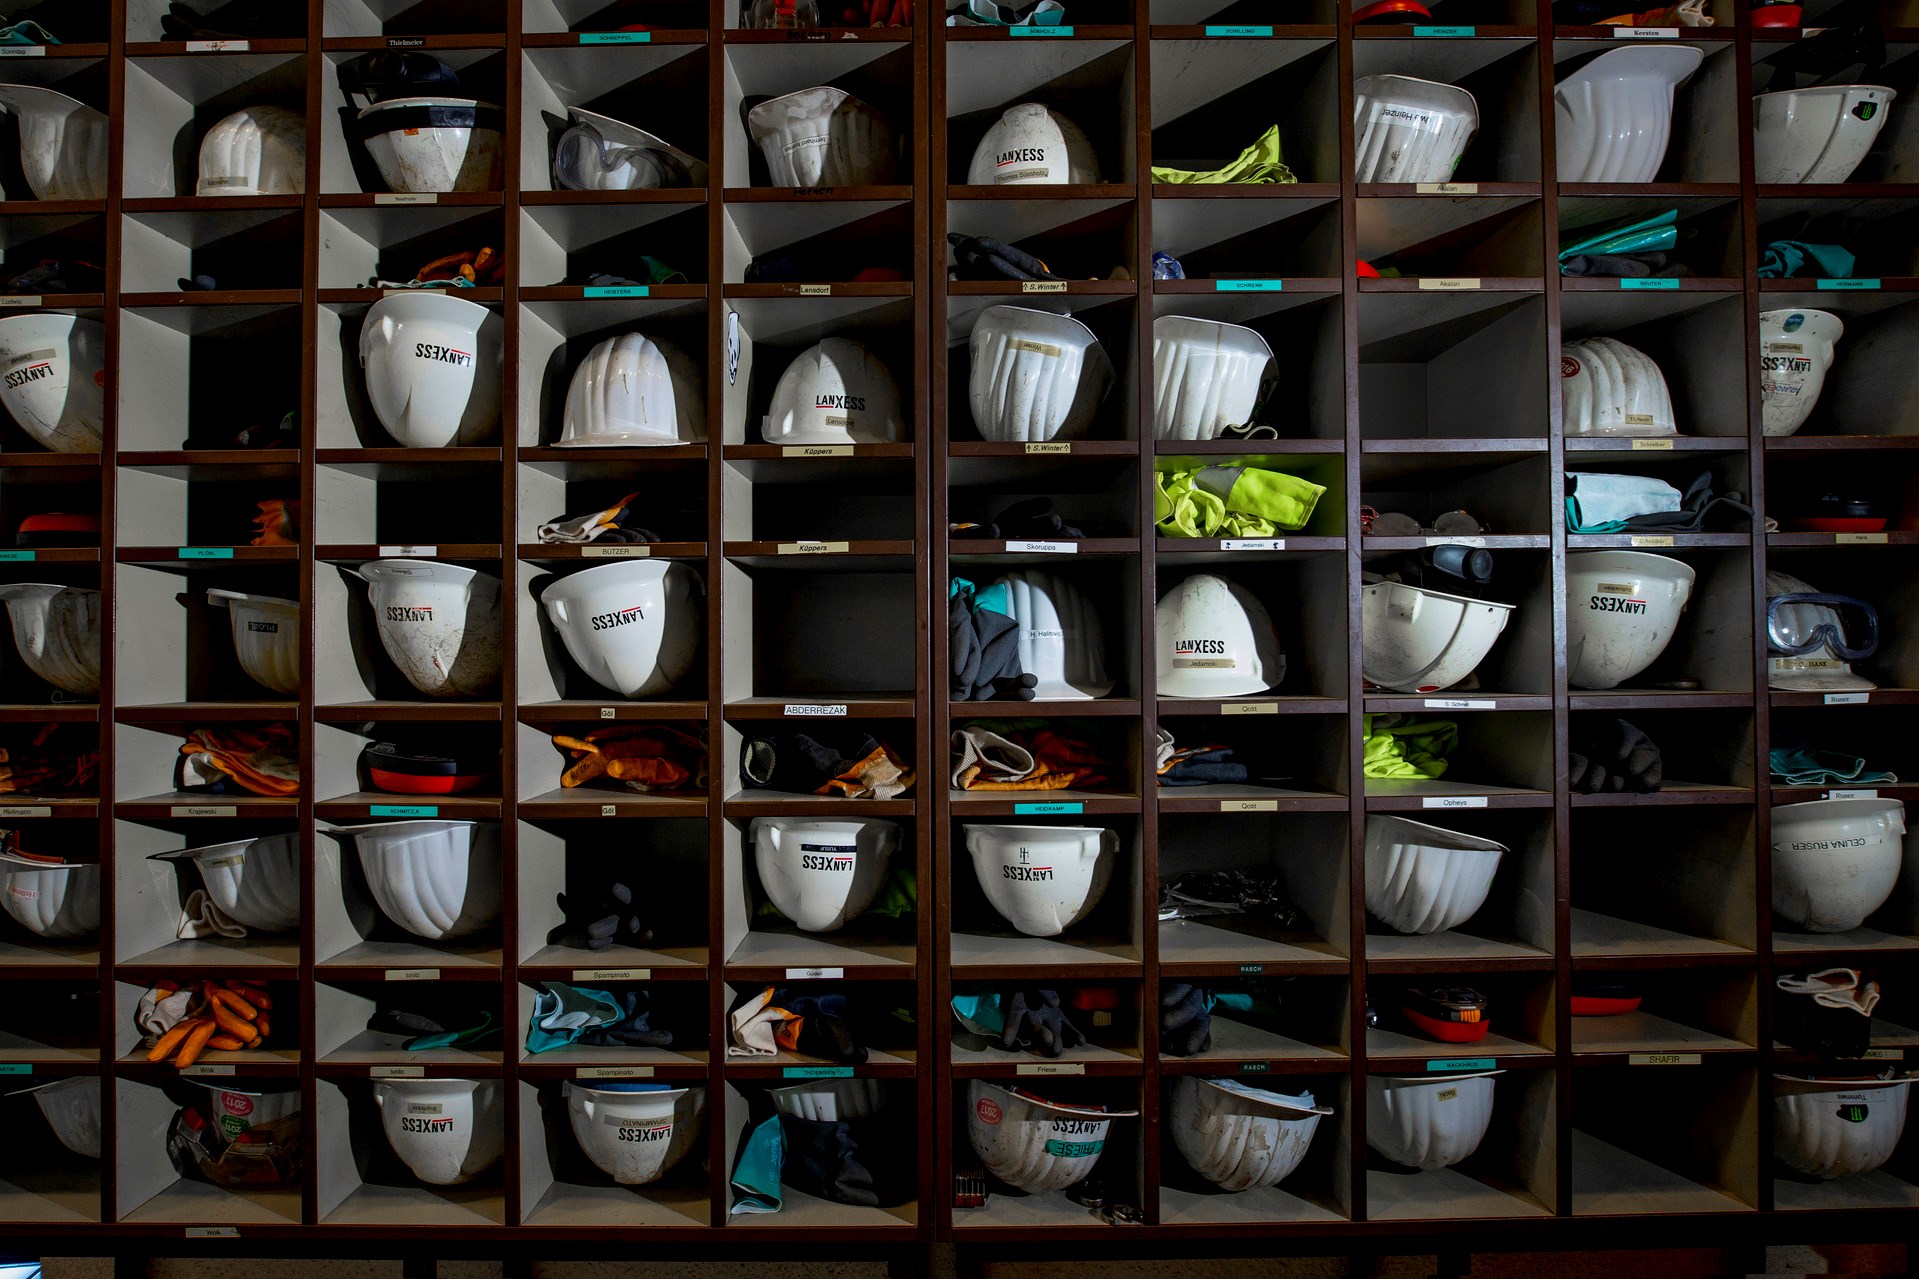 Safety helmets are stored properly and safely for the next use